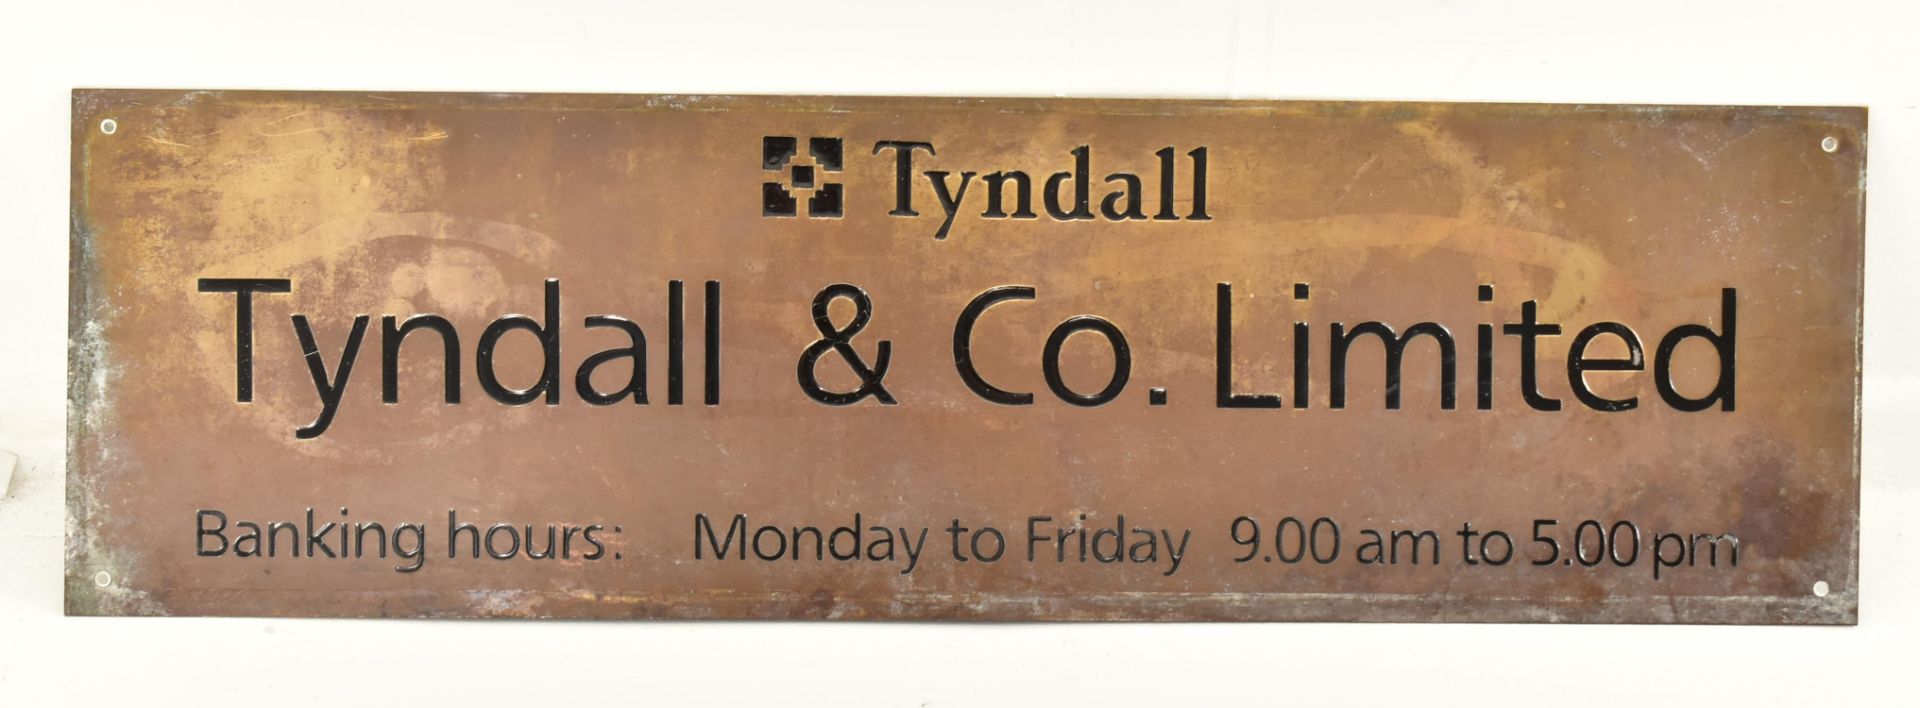 TYNDALL & CO. LIMITED - PAIR OF METAL STREET SIGNS - Image 6 of 9